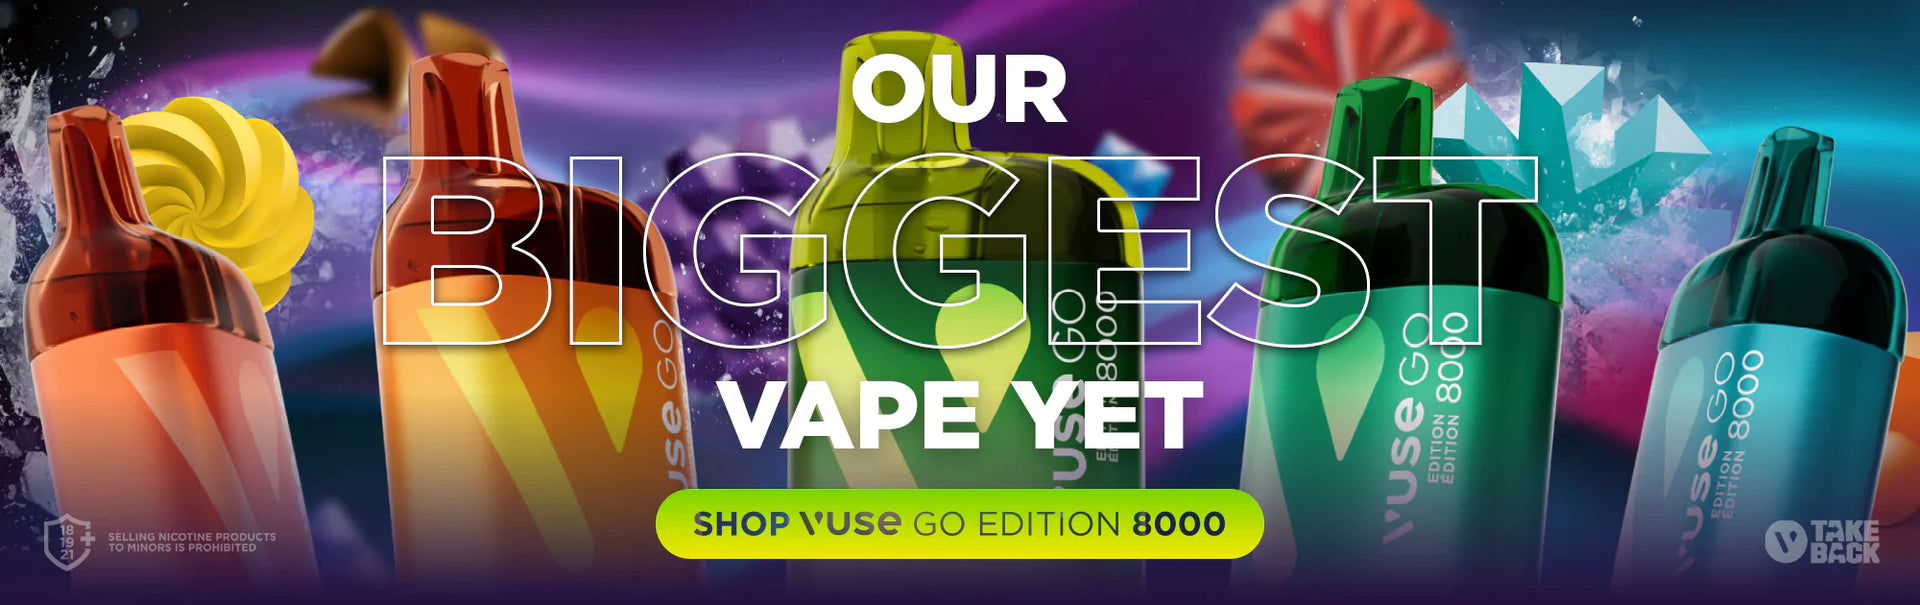 Buy! Vuse biggest vape yet! Vuse GO Edition 8000 comes equiped with upto 8000puffs and 15 mL of e-liquid. Explore a diverse selection of intense, juicy, and cool flavors accompanied by Vuse innovative new heating technology. 